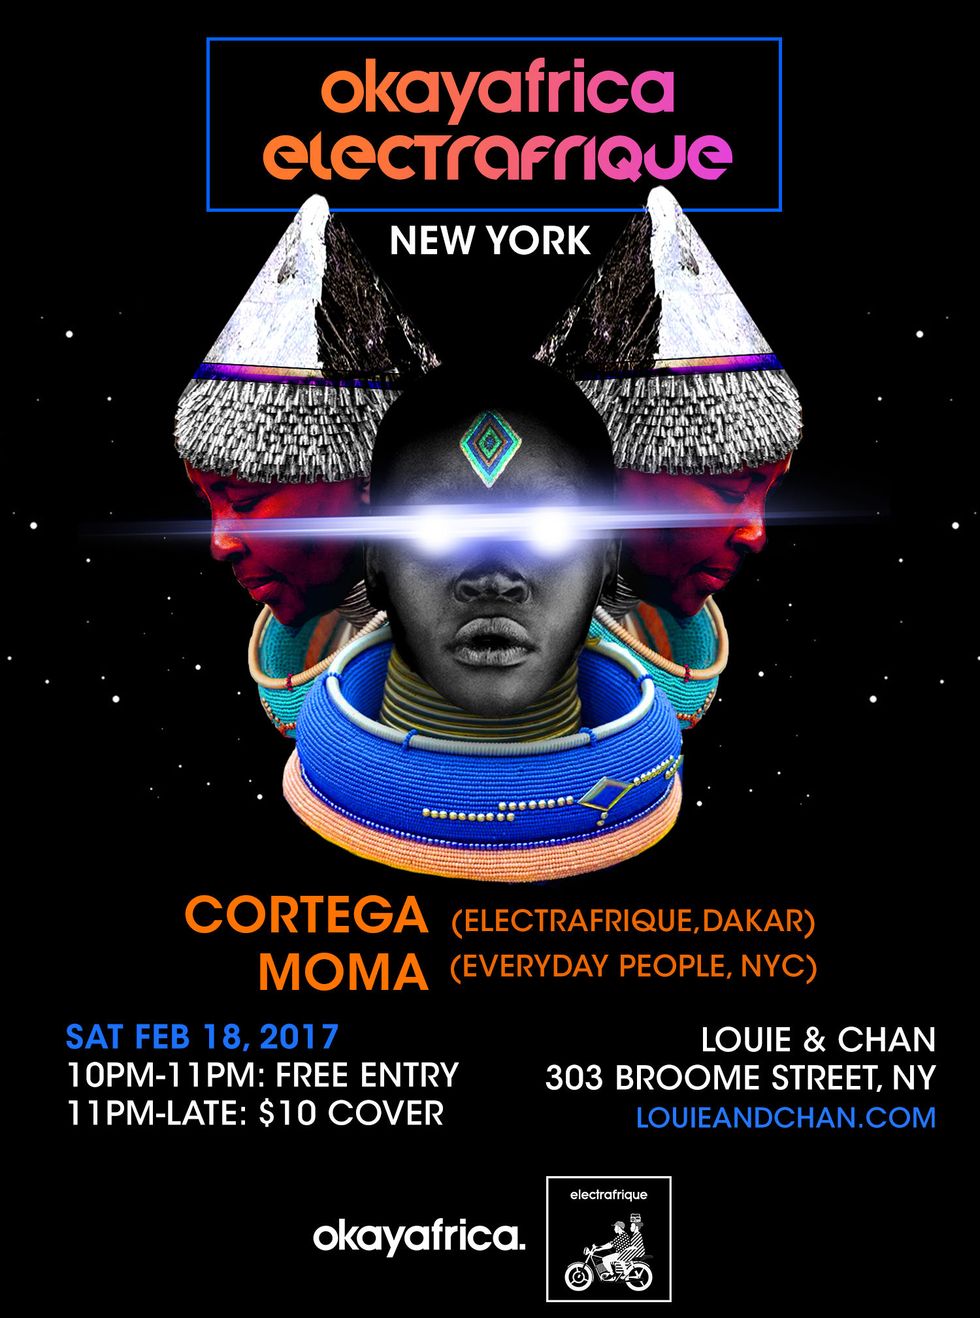 Join Us For Our Electrafrique NYC Party This Weekend With Stanley Enow, DJ Moma & DJ Cortega!